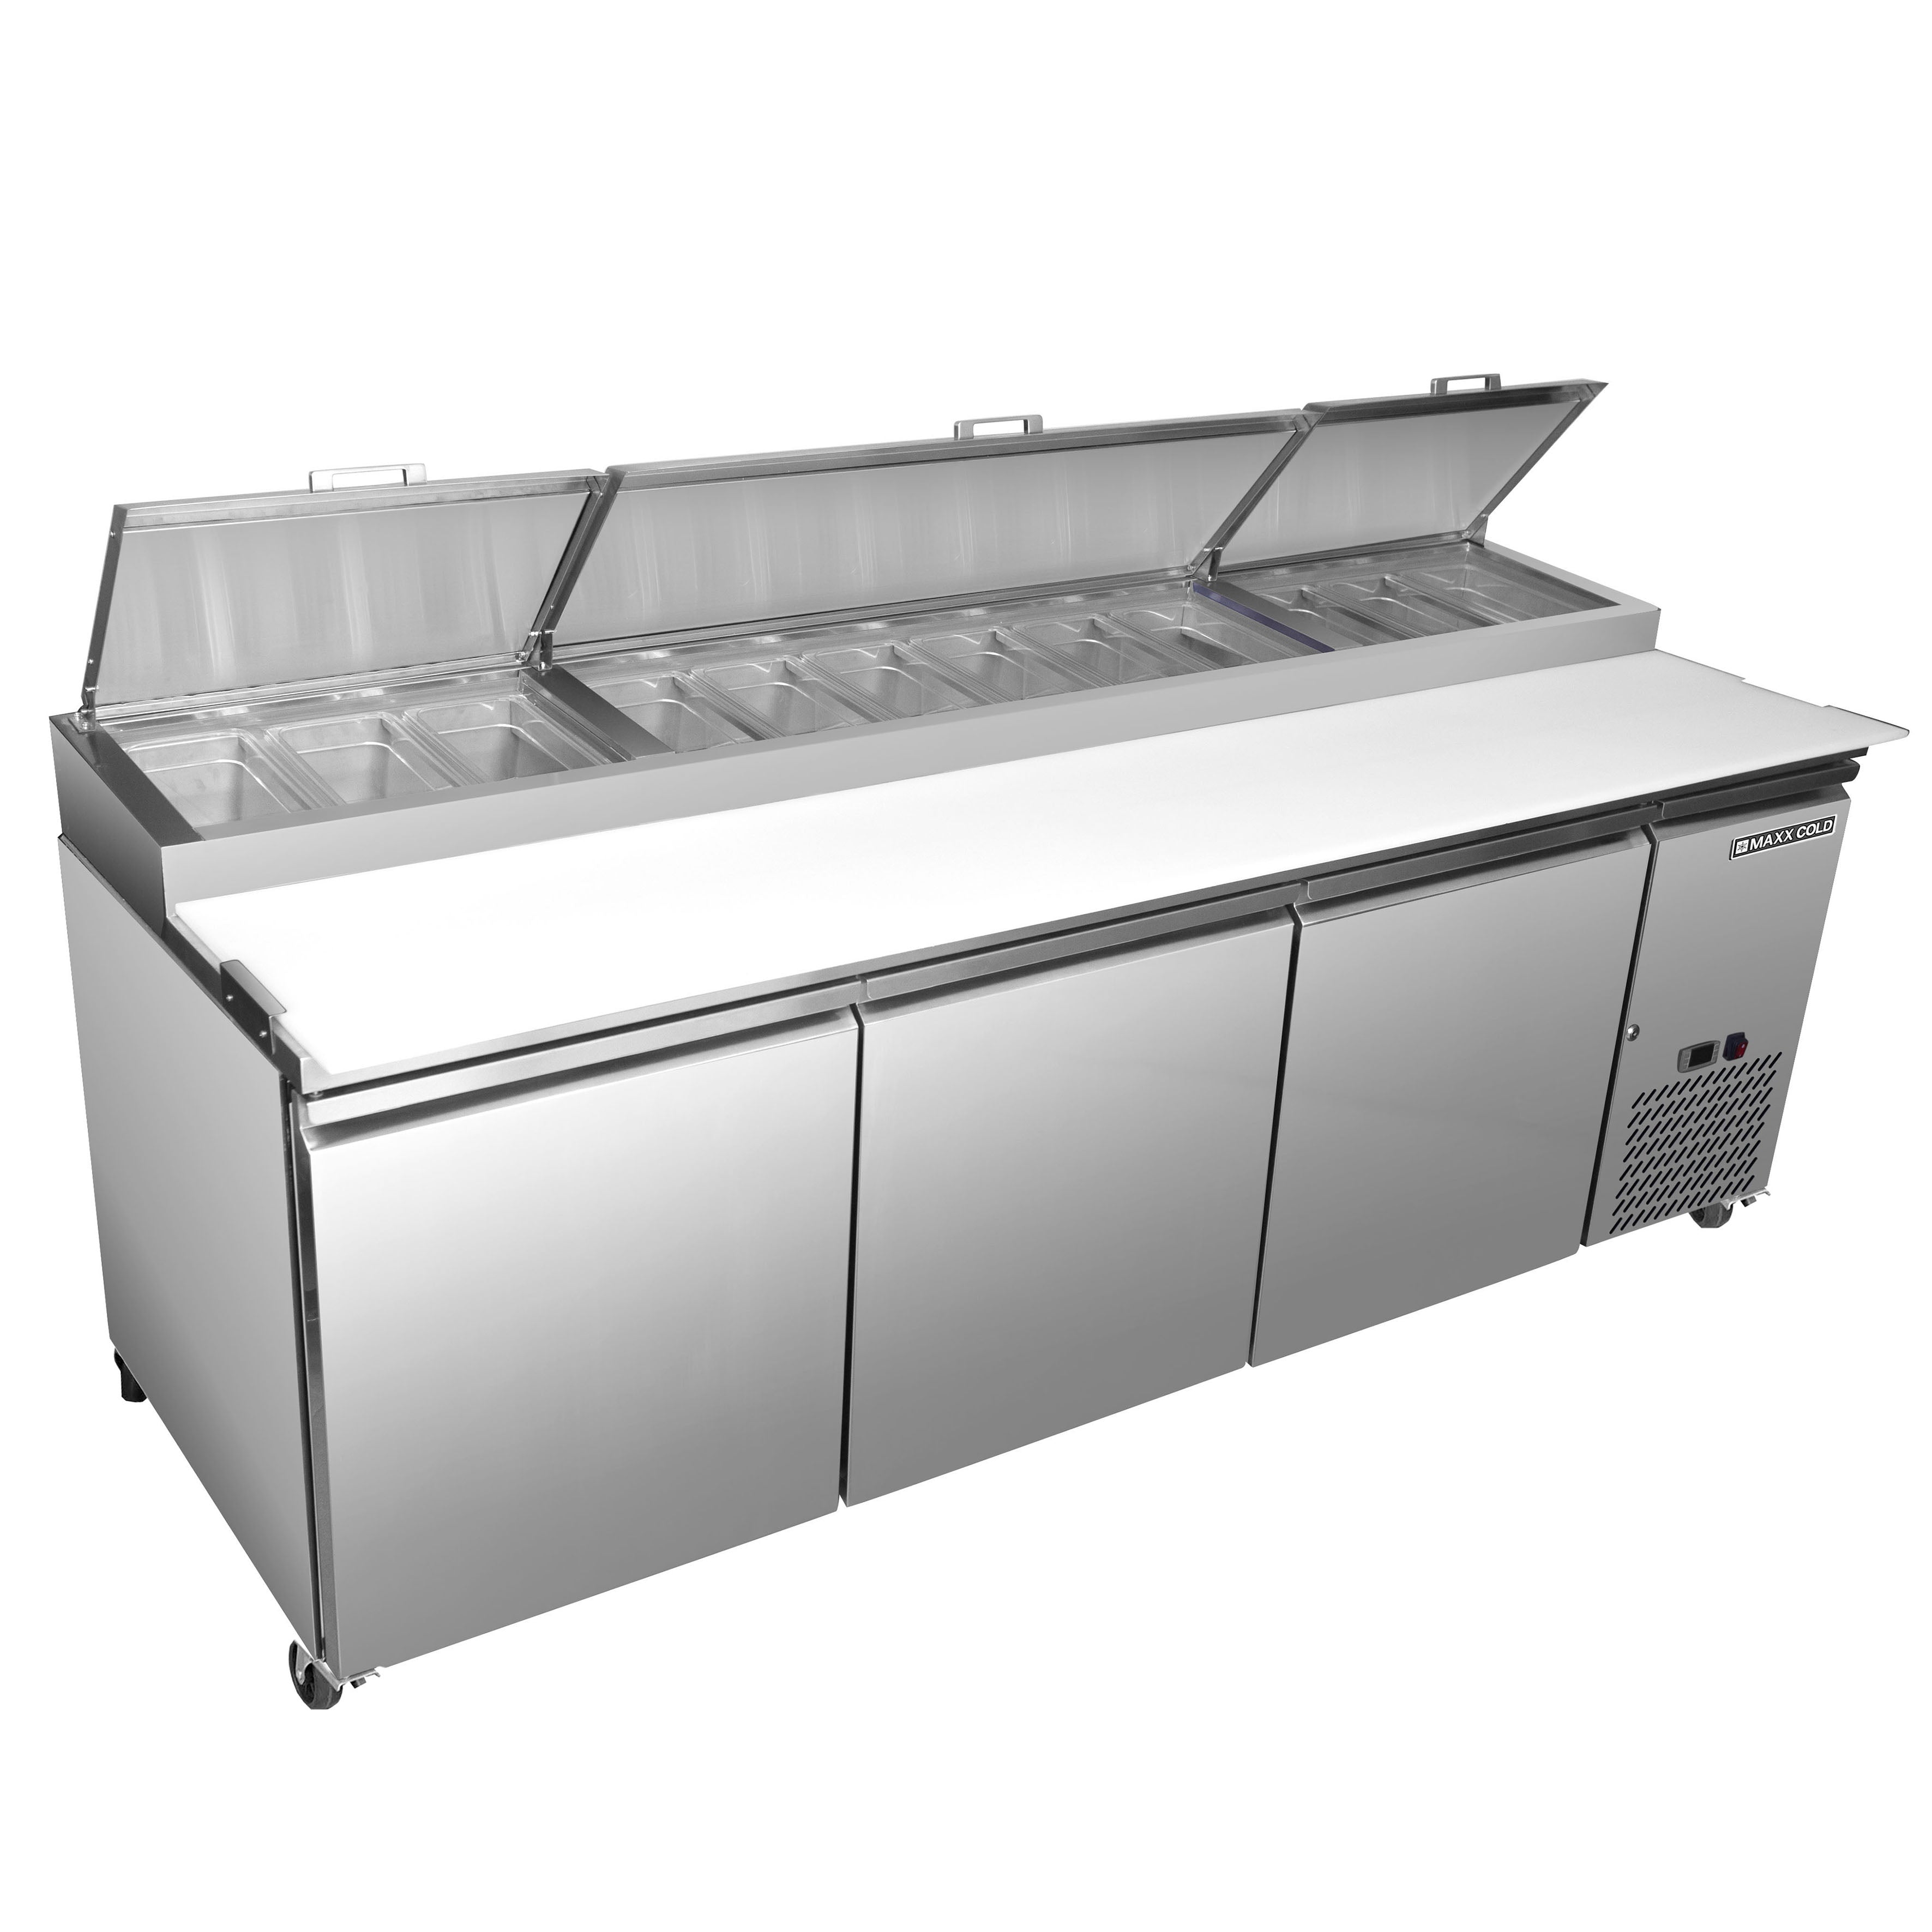 Maxx Cold - MXSPP92HC, Maxx Cold Three-Door Refrigerated Pizza Prep Table, 92" W, 30.87 cu. ft. Storage Capacity, Equipped with (12) 4" Deep Pans and Cutting Board, in Stainless Steel